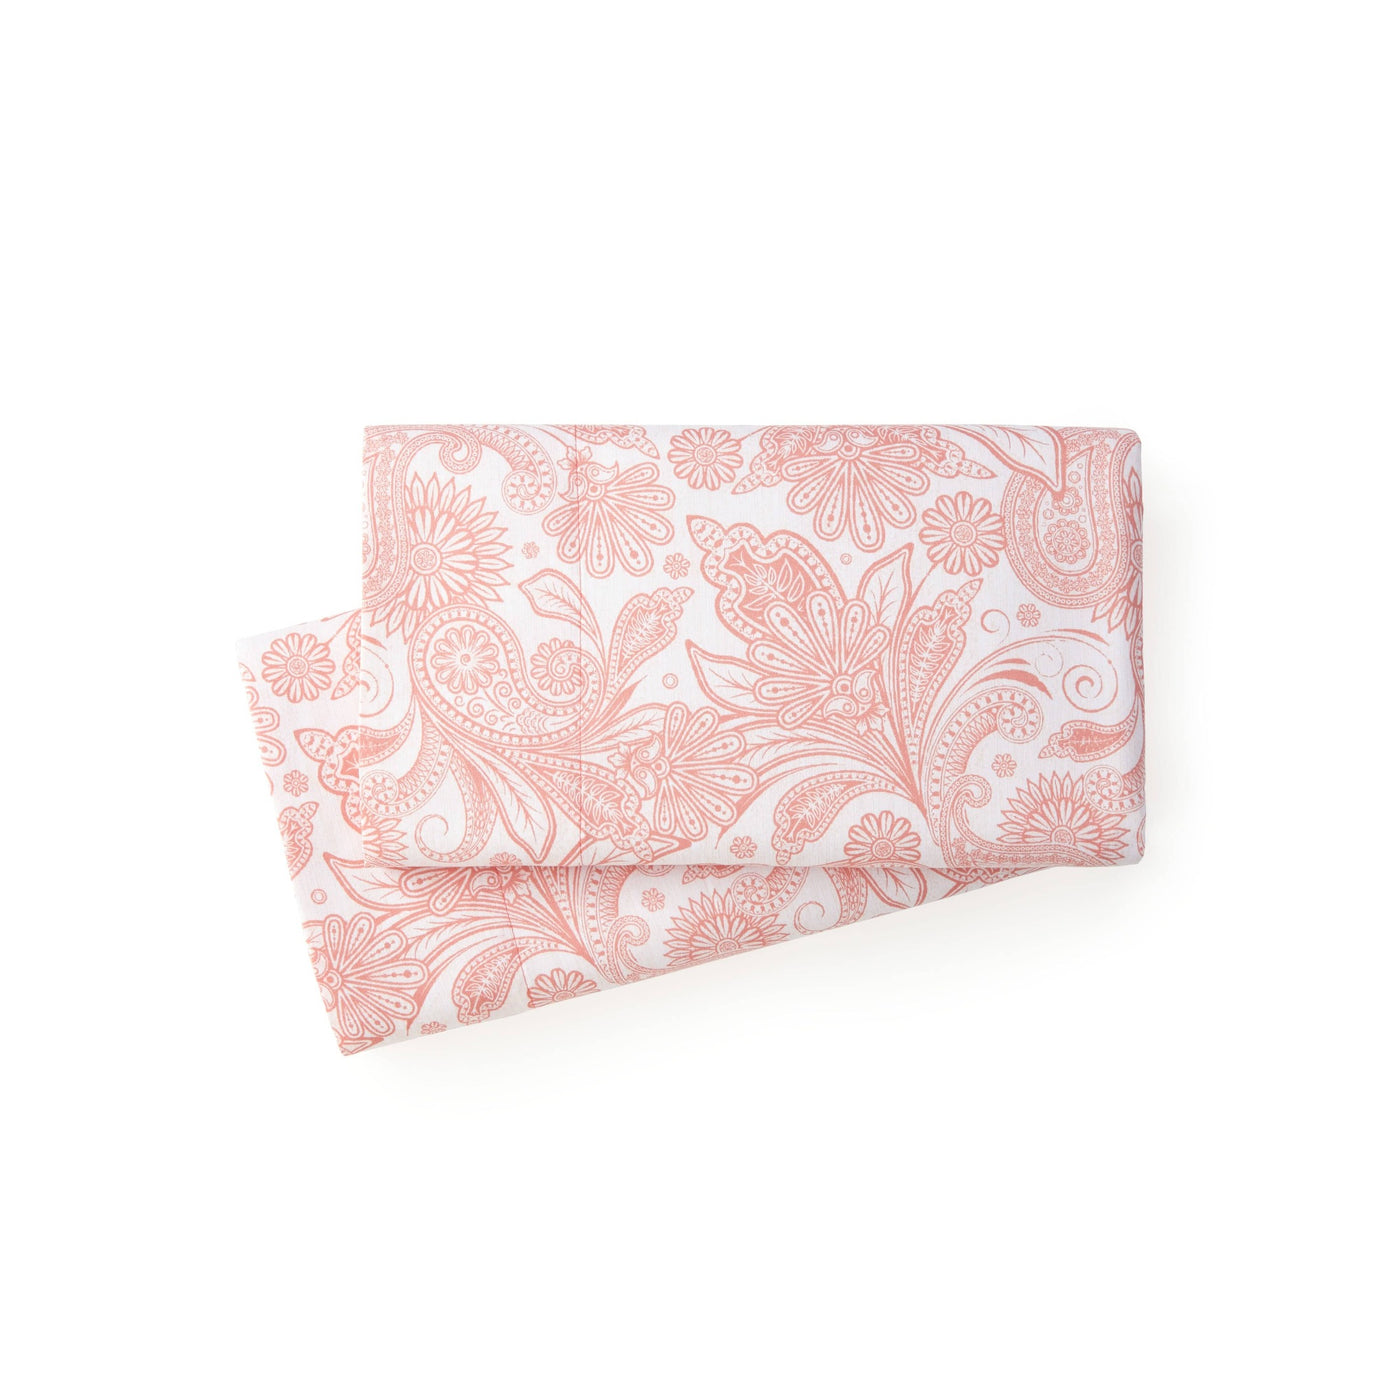 Details and Prints of Perfect Paisley Sheet Set in Coral#color_perfect-paisley-white-with-coral-haze